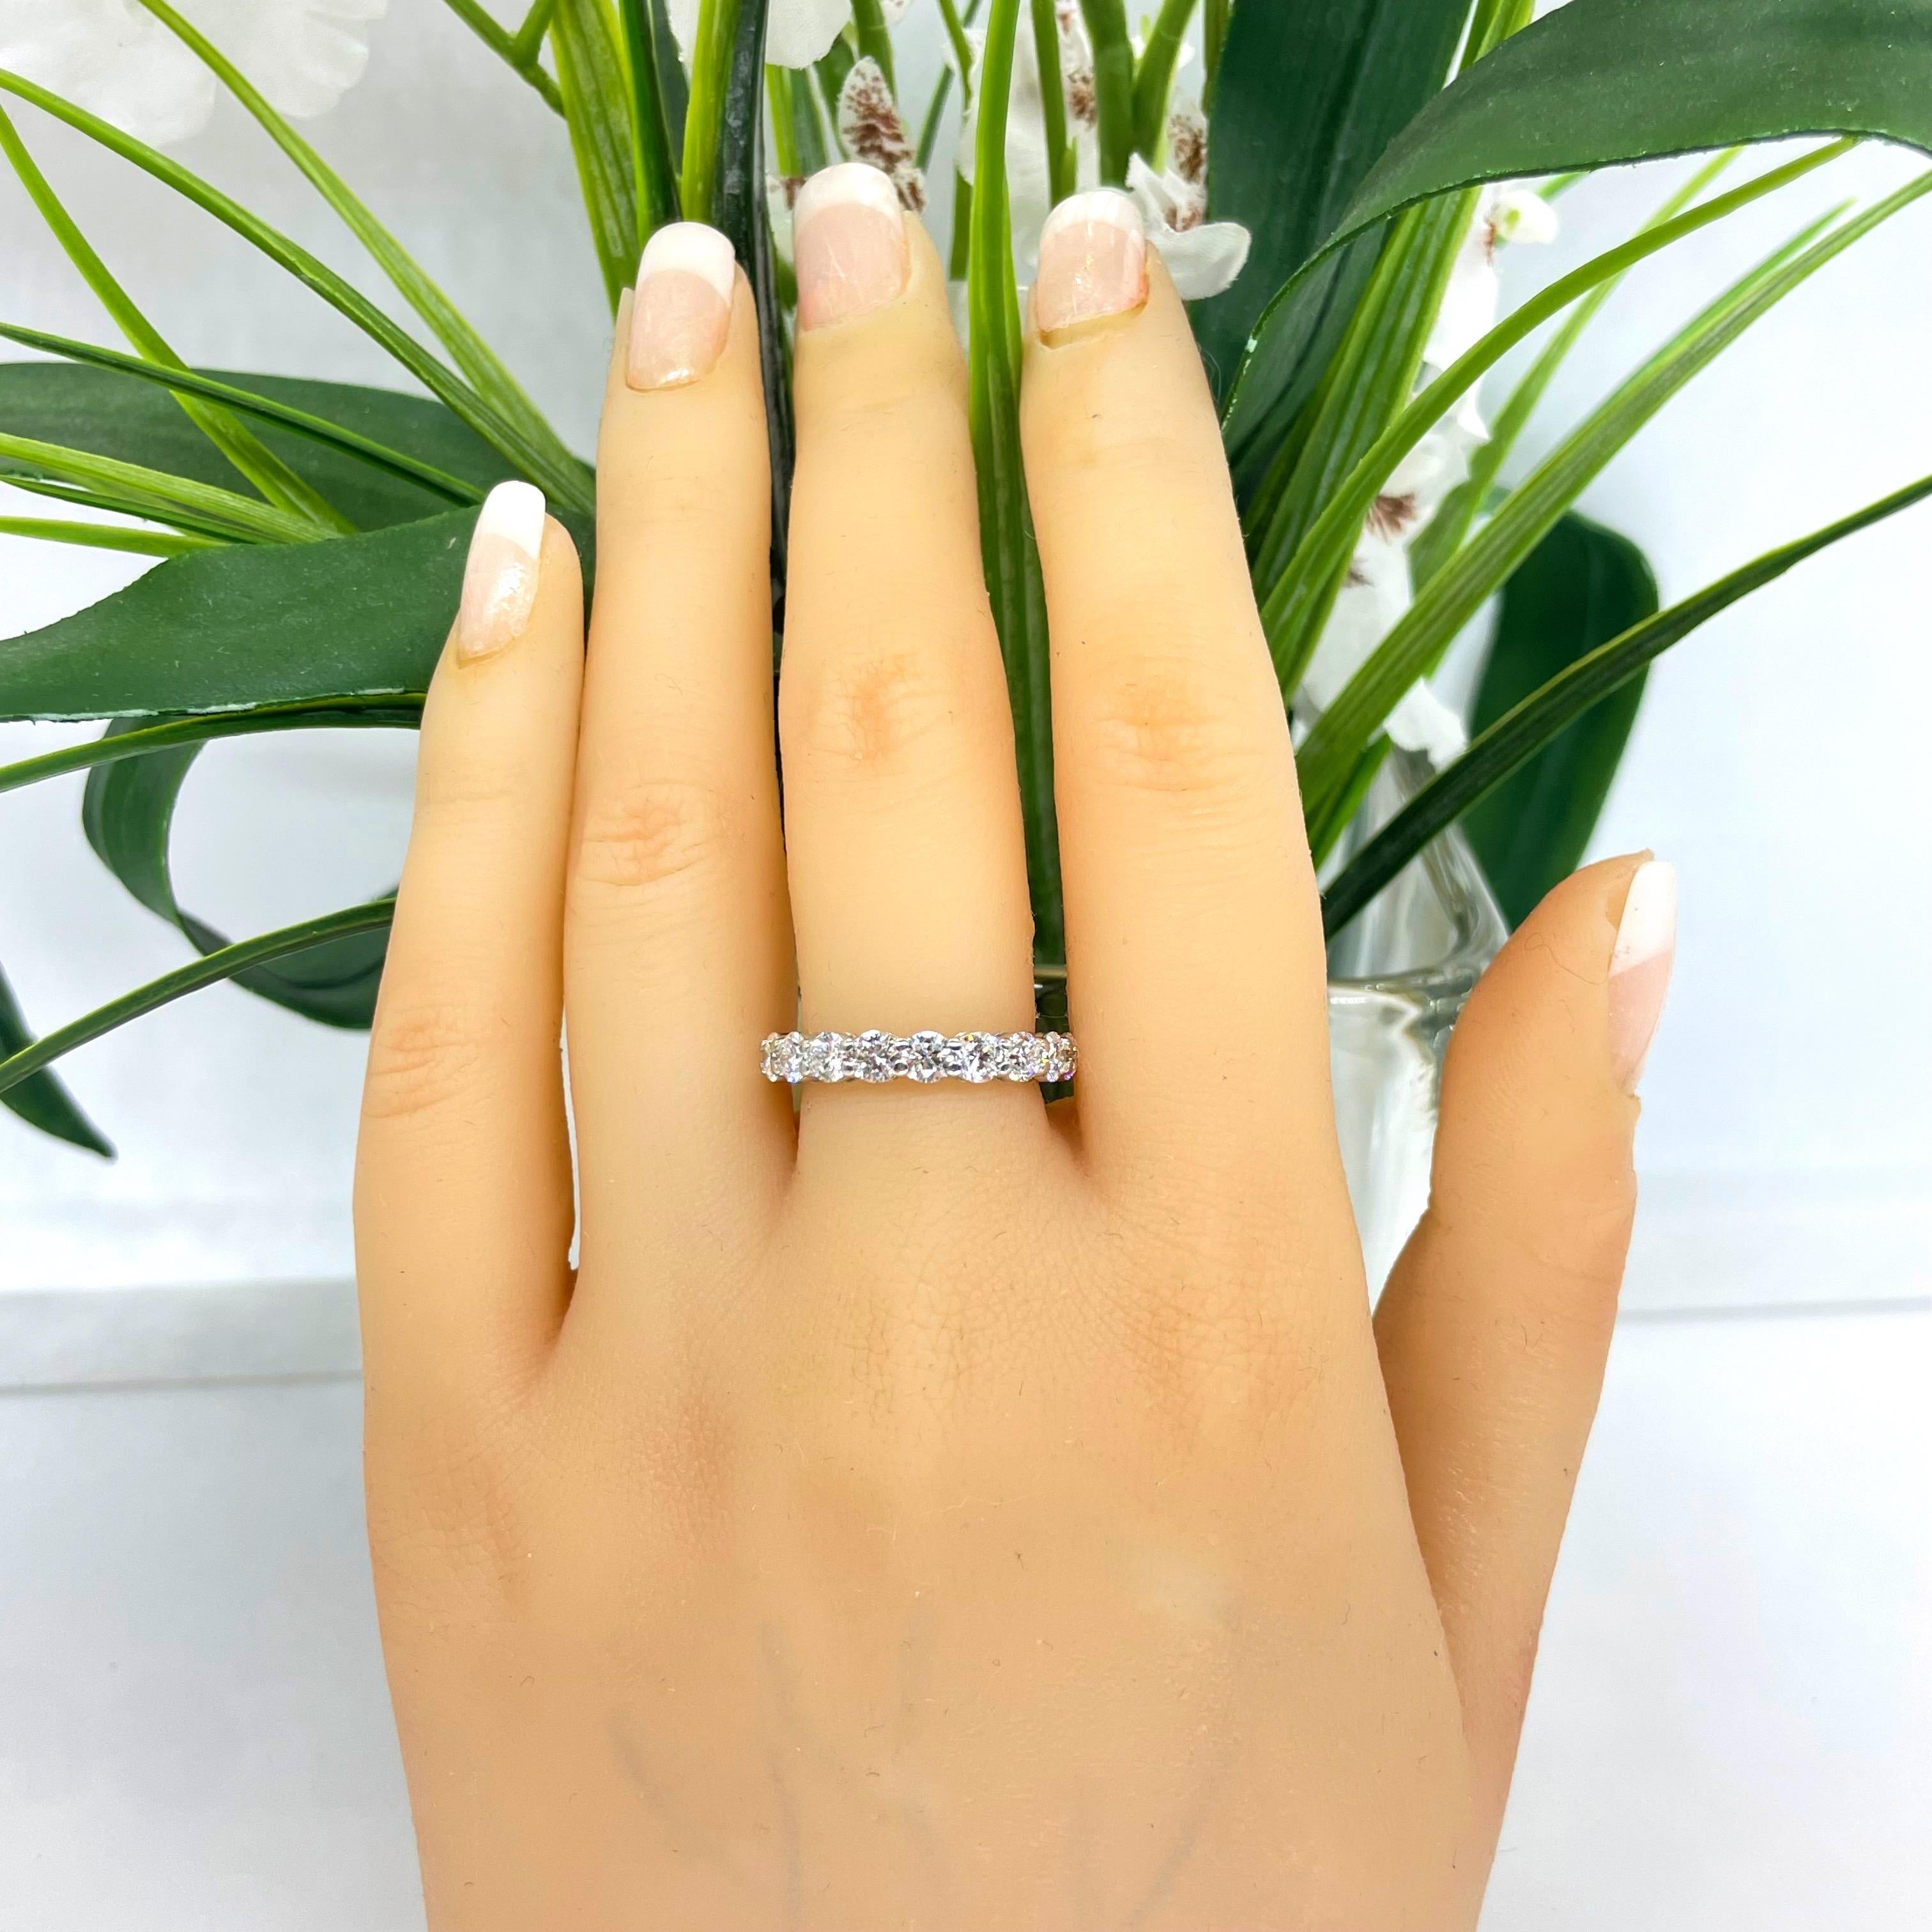 Tiffany & Co FOREVER Full Circle Round Diamond 3.02 tcw Band Ring Platinum In Excellent Condition For Sale In San Diego, CA